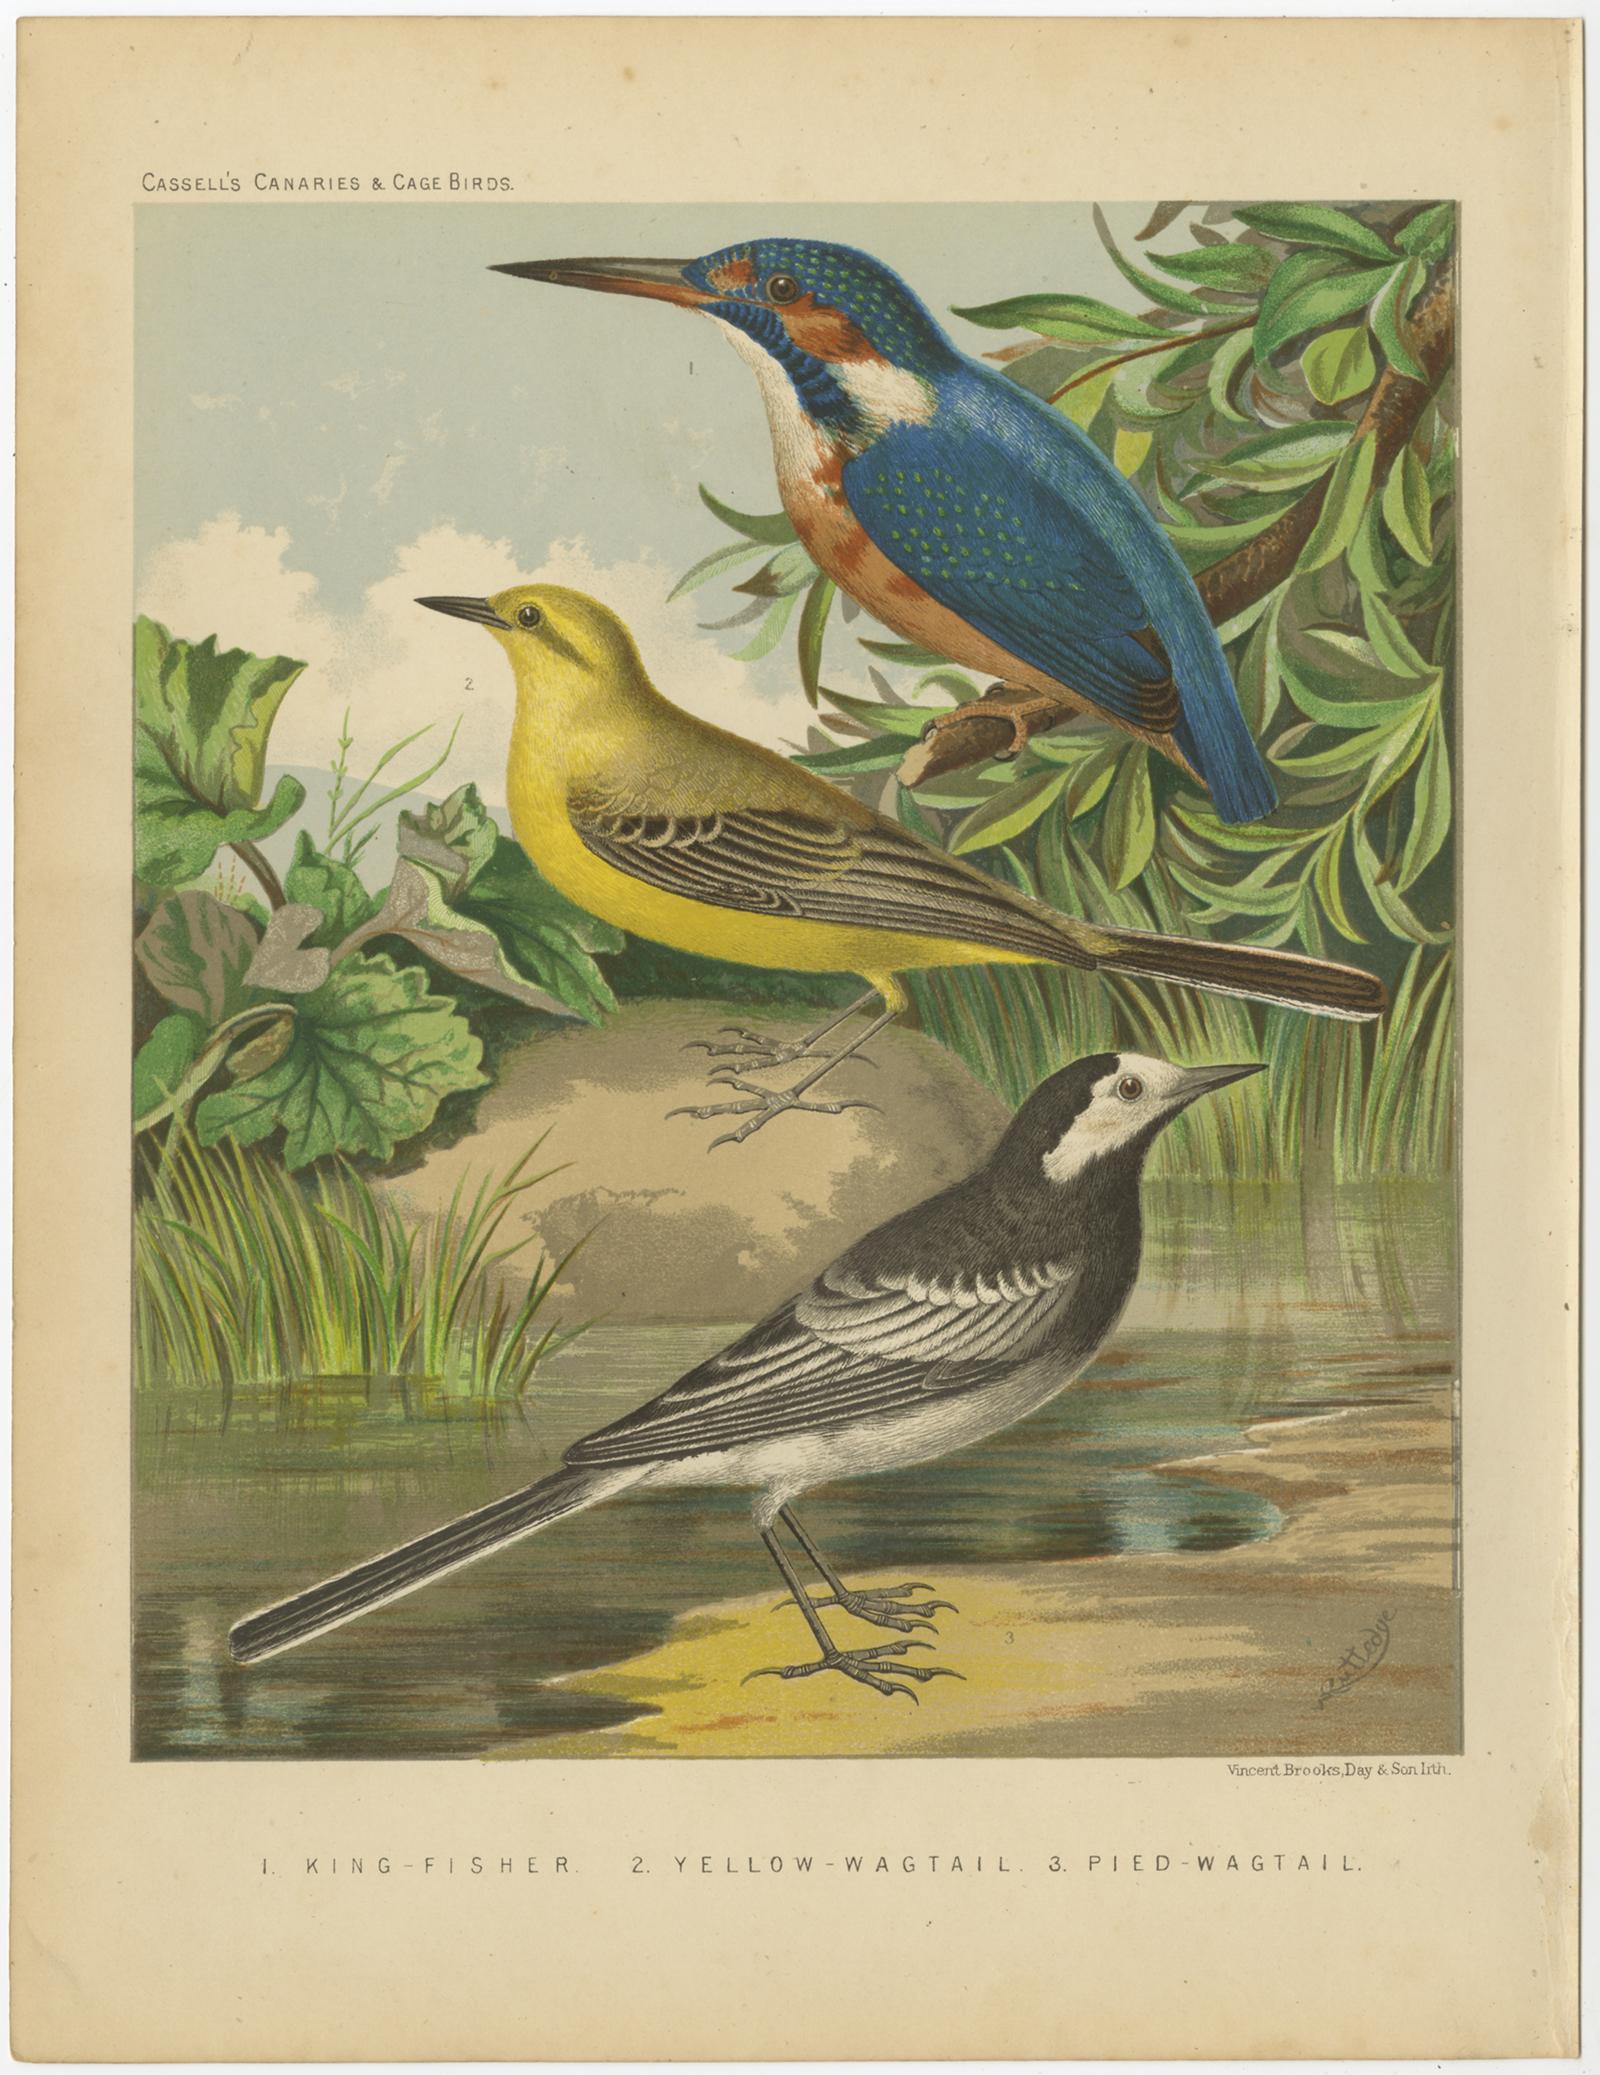 Antique bird print titled '1. King Fisher 2. Yellow-Wagtail 3. Pied-Wagtail'. Old bird print depicting the Kingfisher, Yellow-Wagtail, White wagtail. This print originates from: 'Illustrated book of canaries and cage-birds' by W. A. Blackston, W.